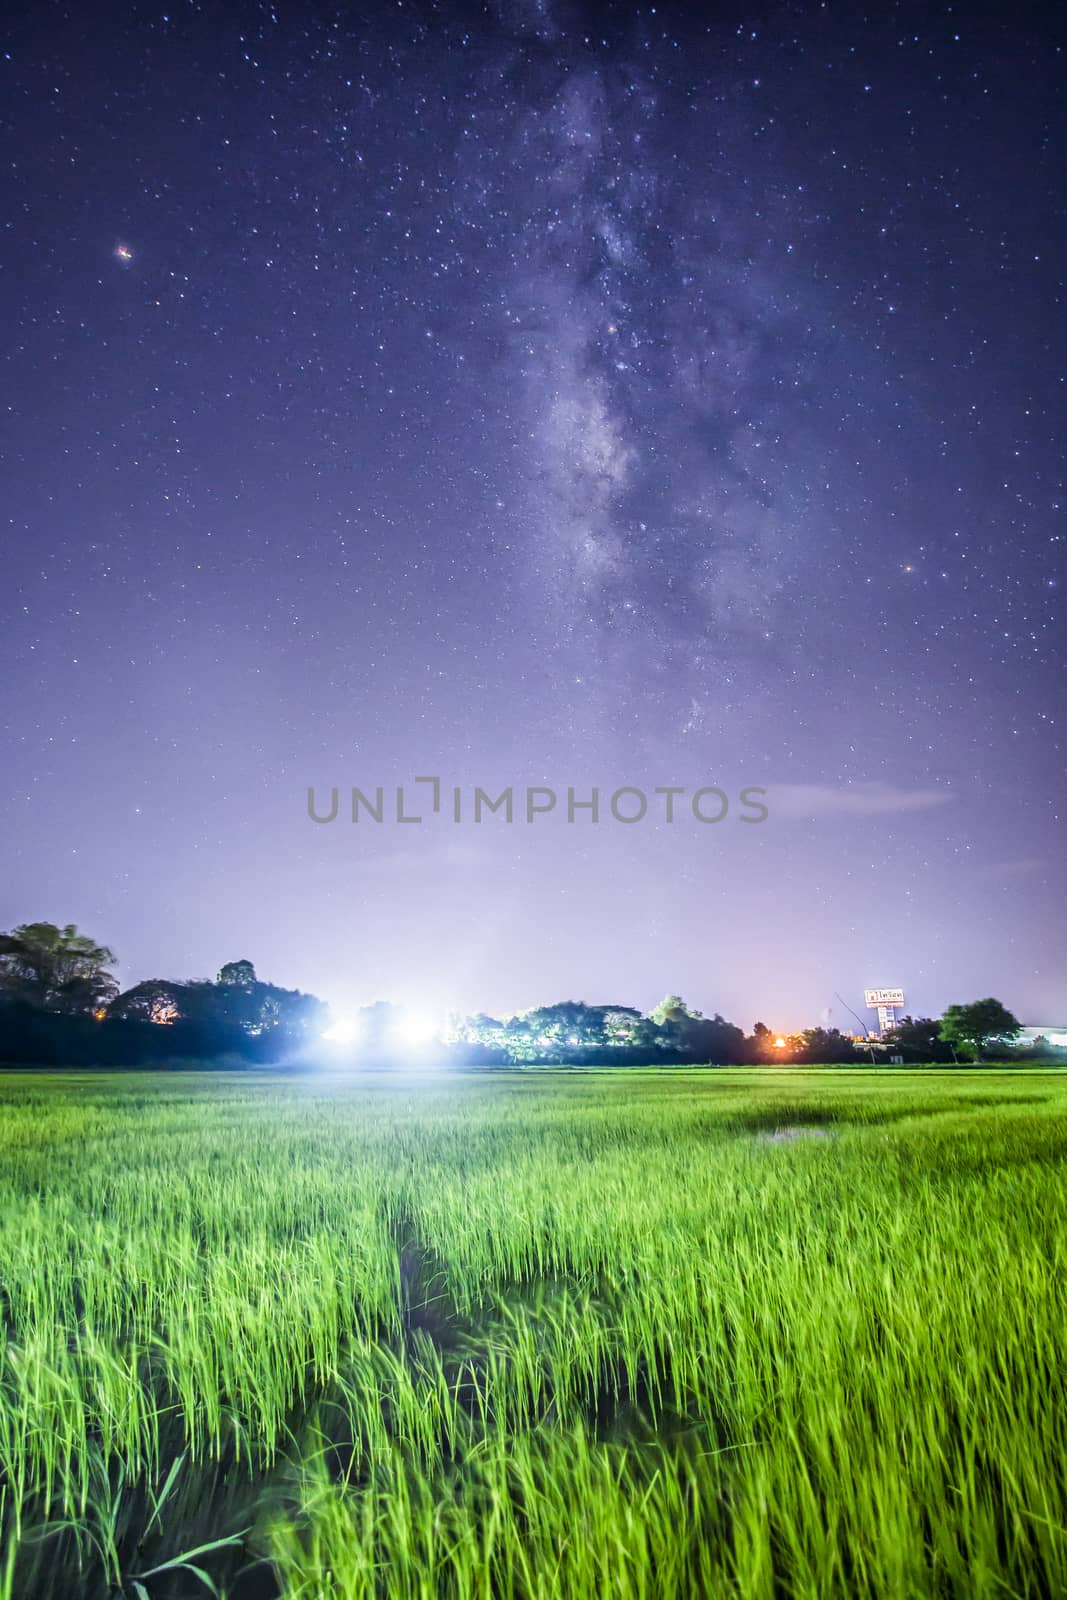 The Milky Way rises over rice field